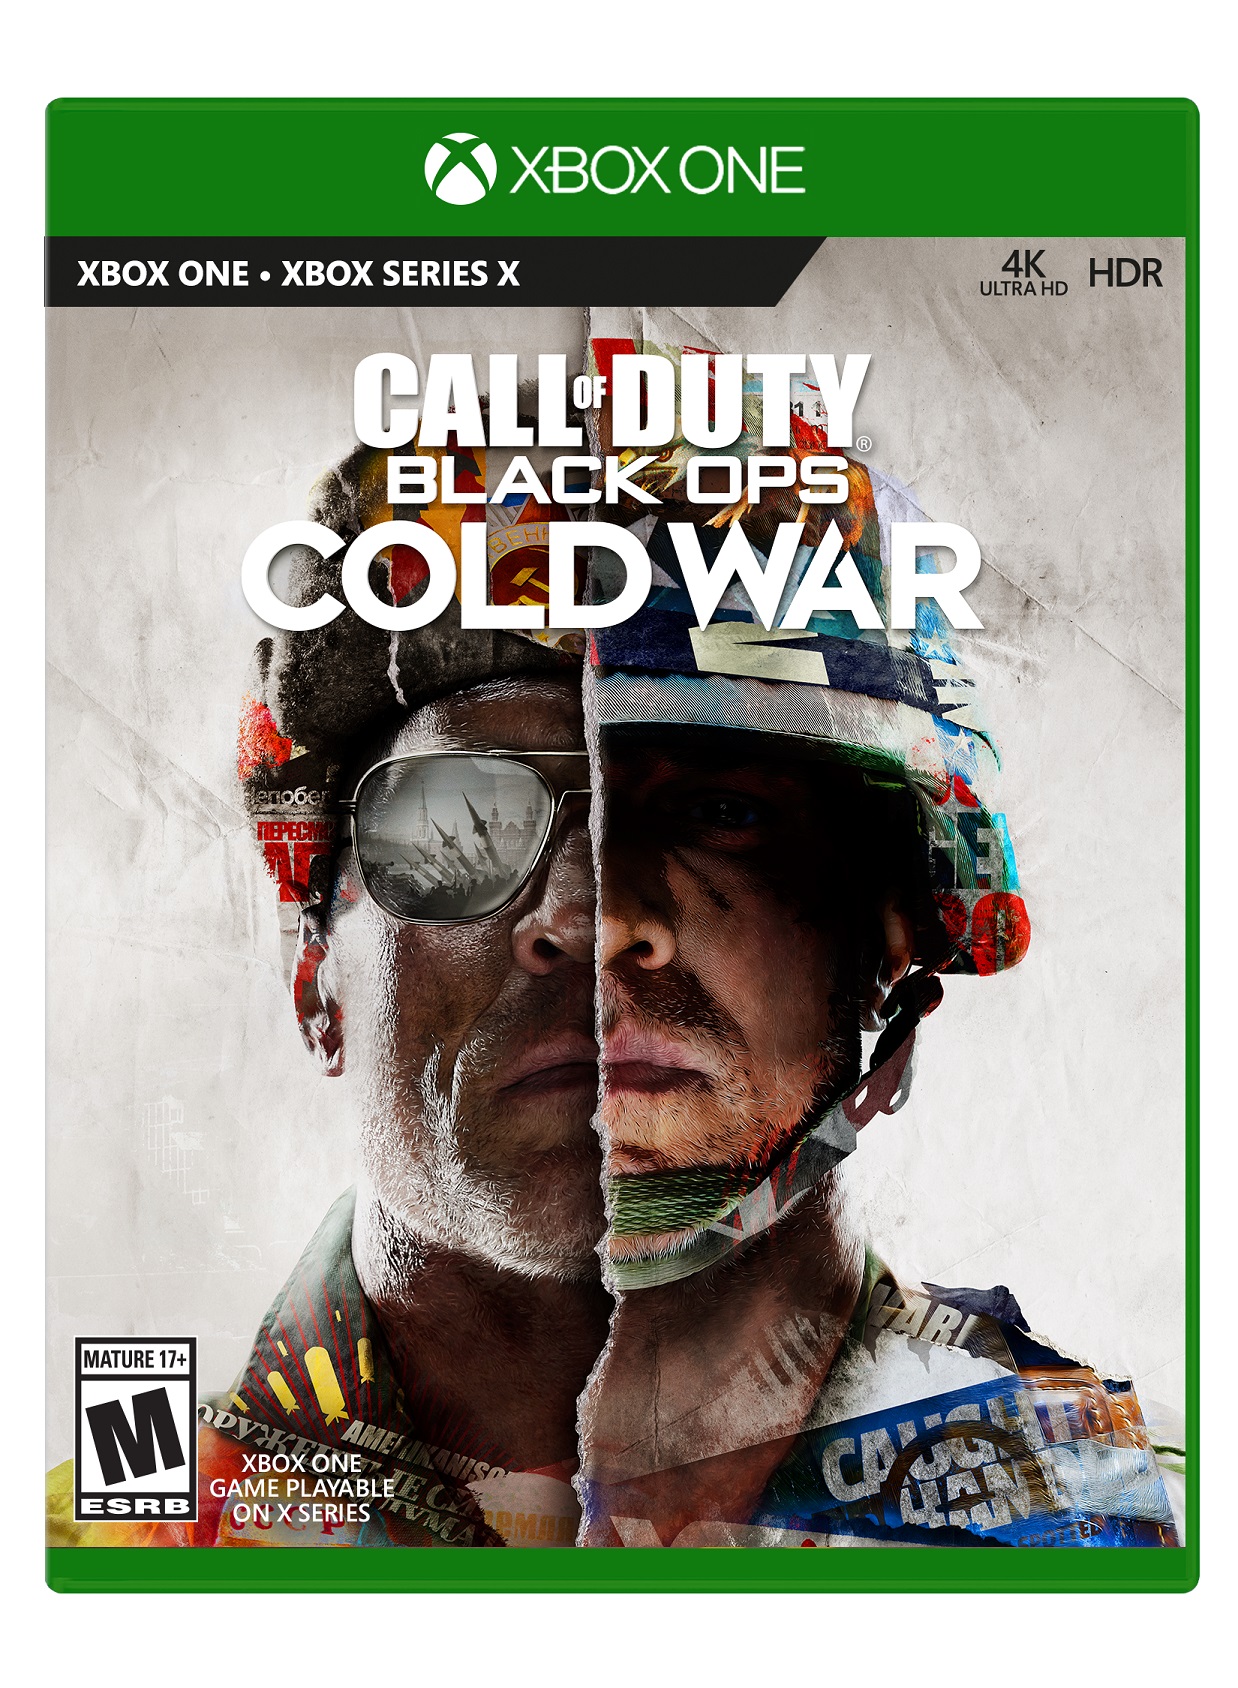 Call of Duty: Black Ops Cold War - Xbox One, Xbox Series X - image 1 of 3